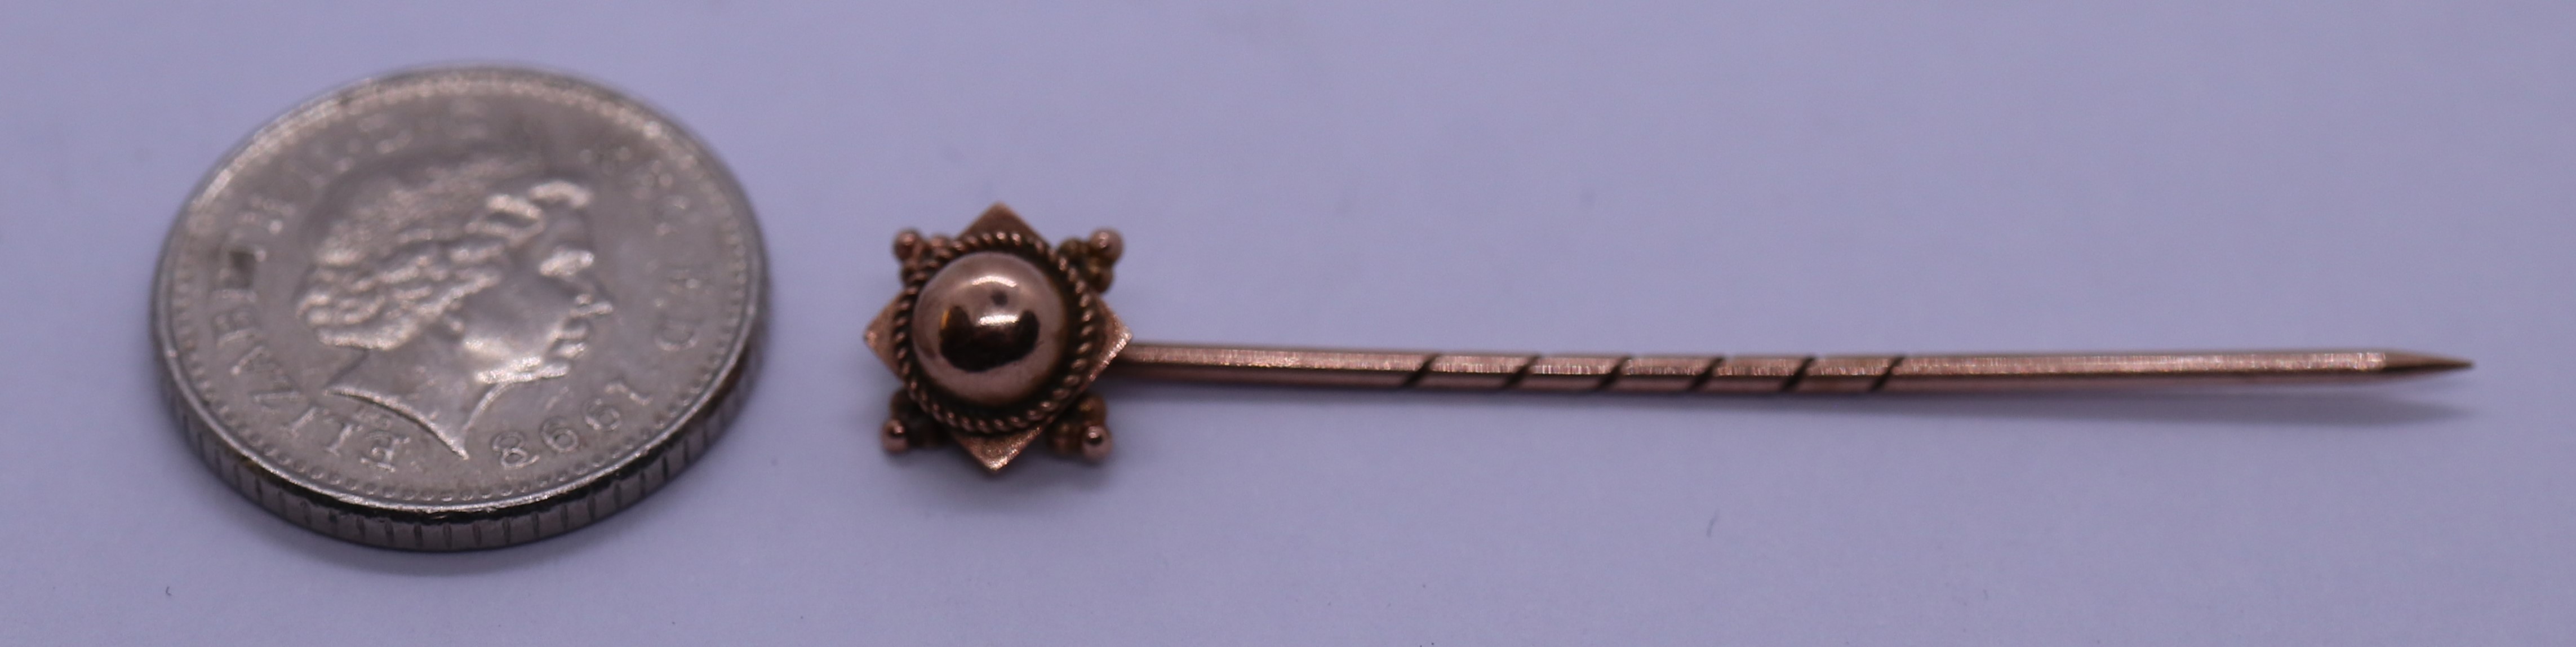 9ct gold tie pin - Image 2 of 2